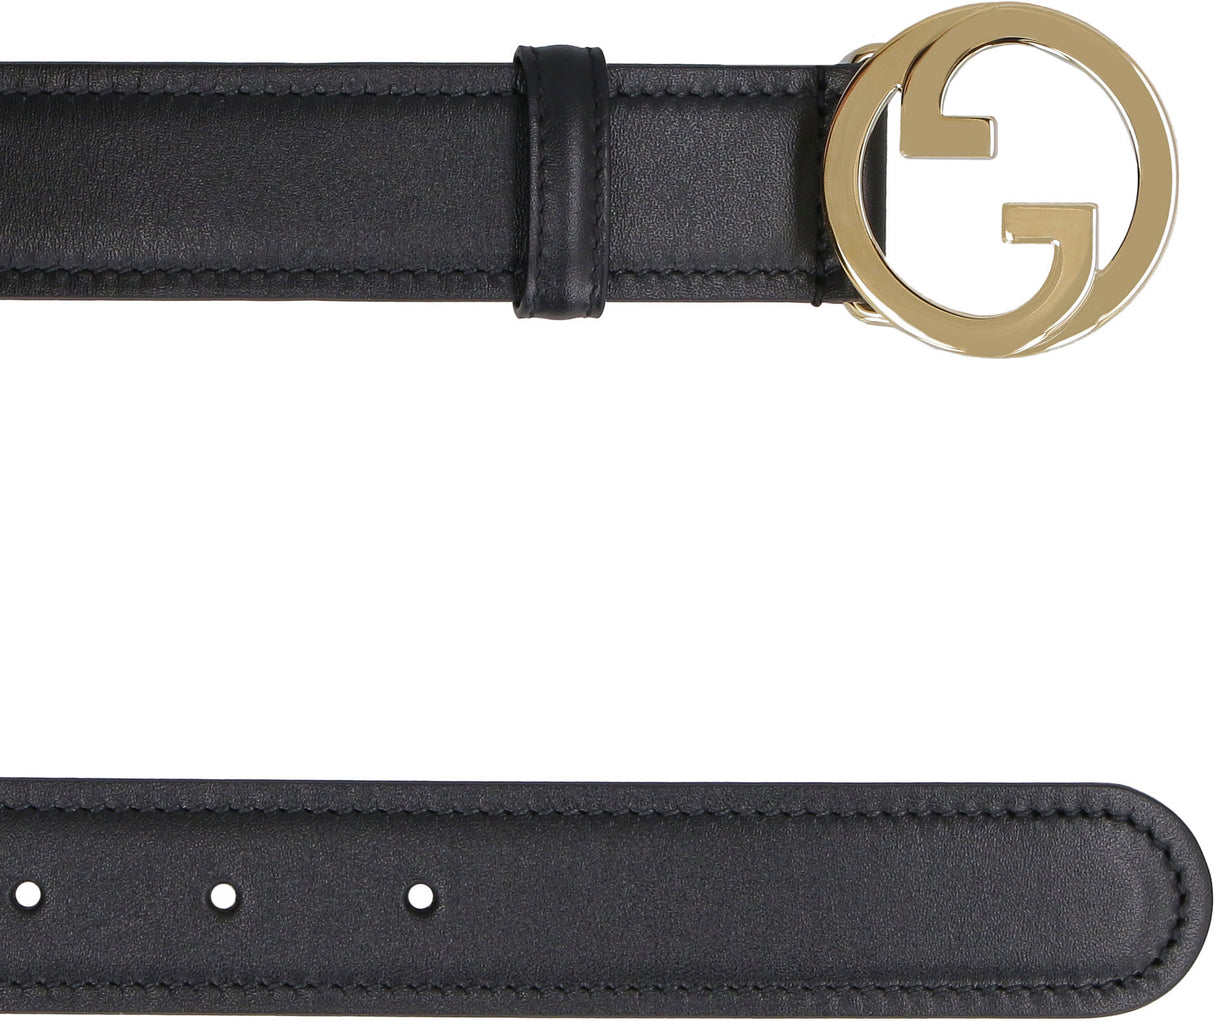 GUCCI Luxurious Black Leather Belt for Women - Versatile and Chic Accessory for Any Season